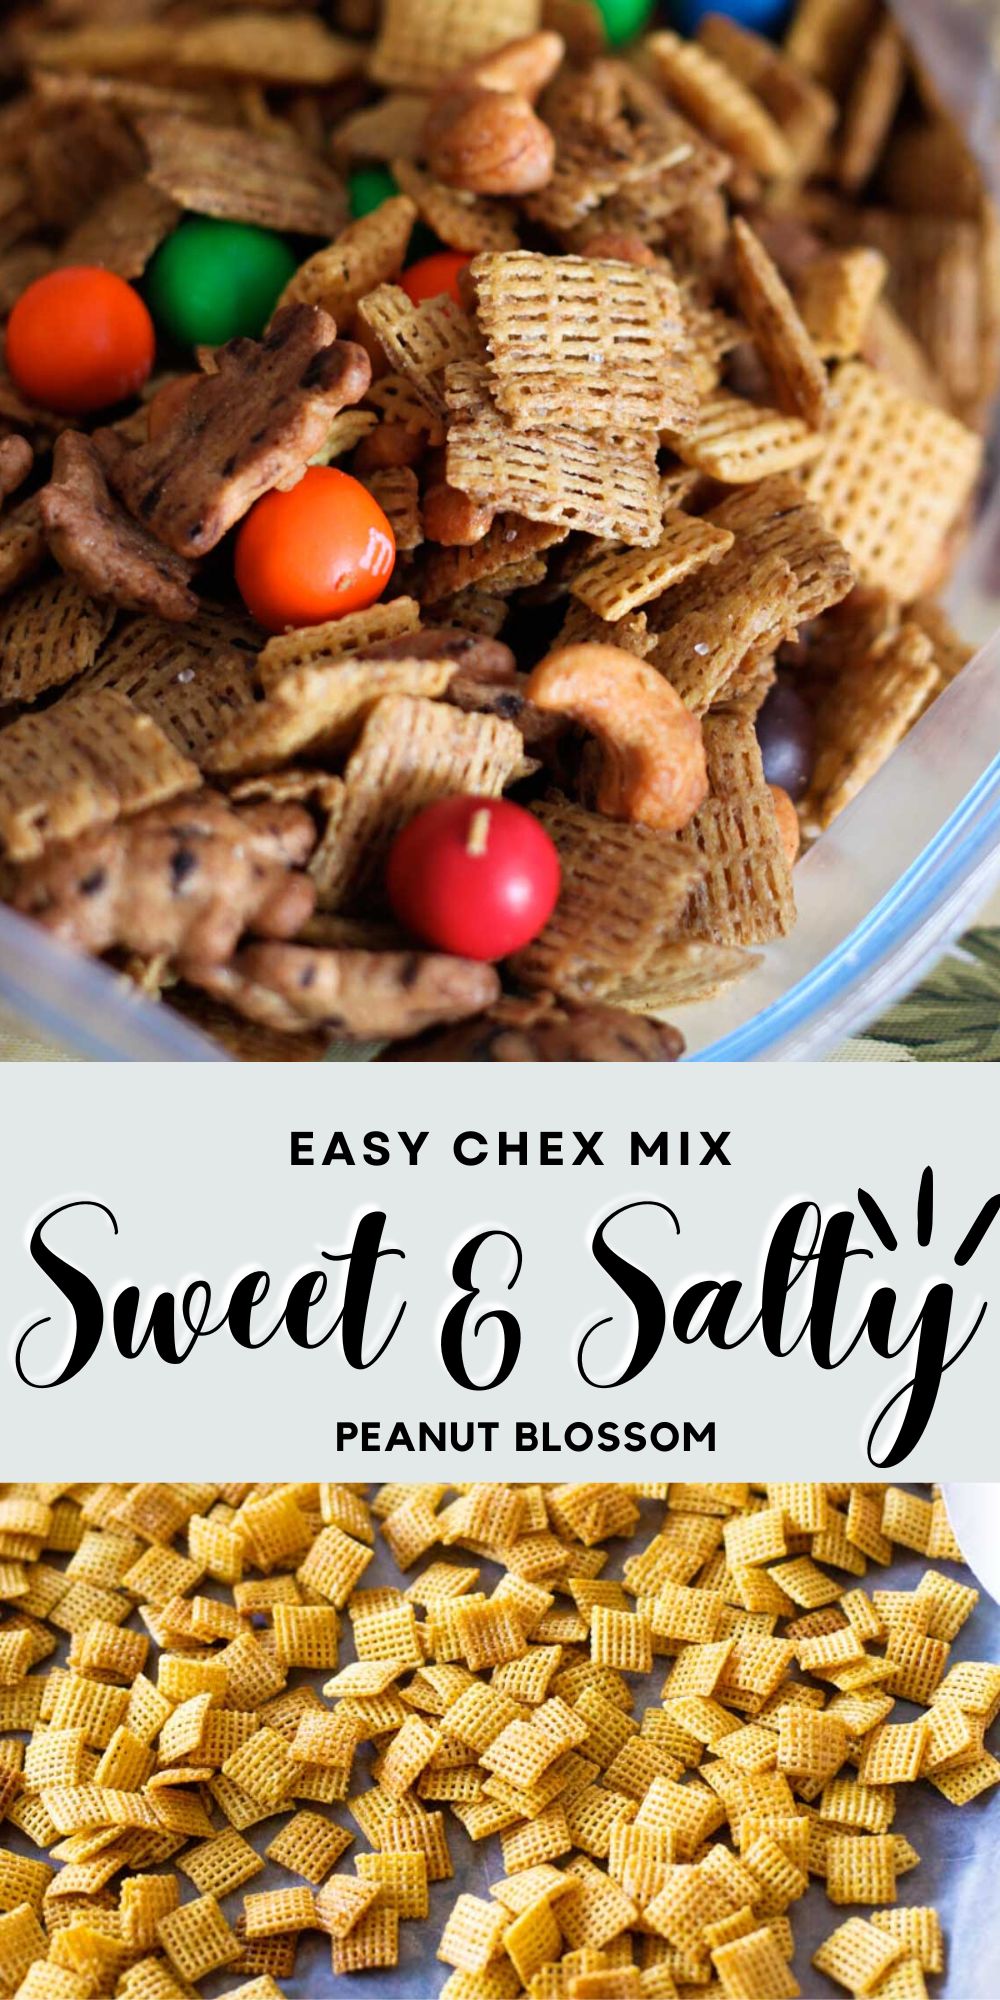 The photo collage shows the finished sweet and salty Chex Mix next to a photo of the cereal laying out on a baking sheet.